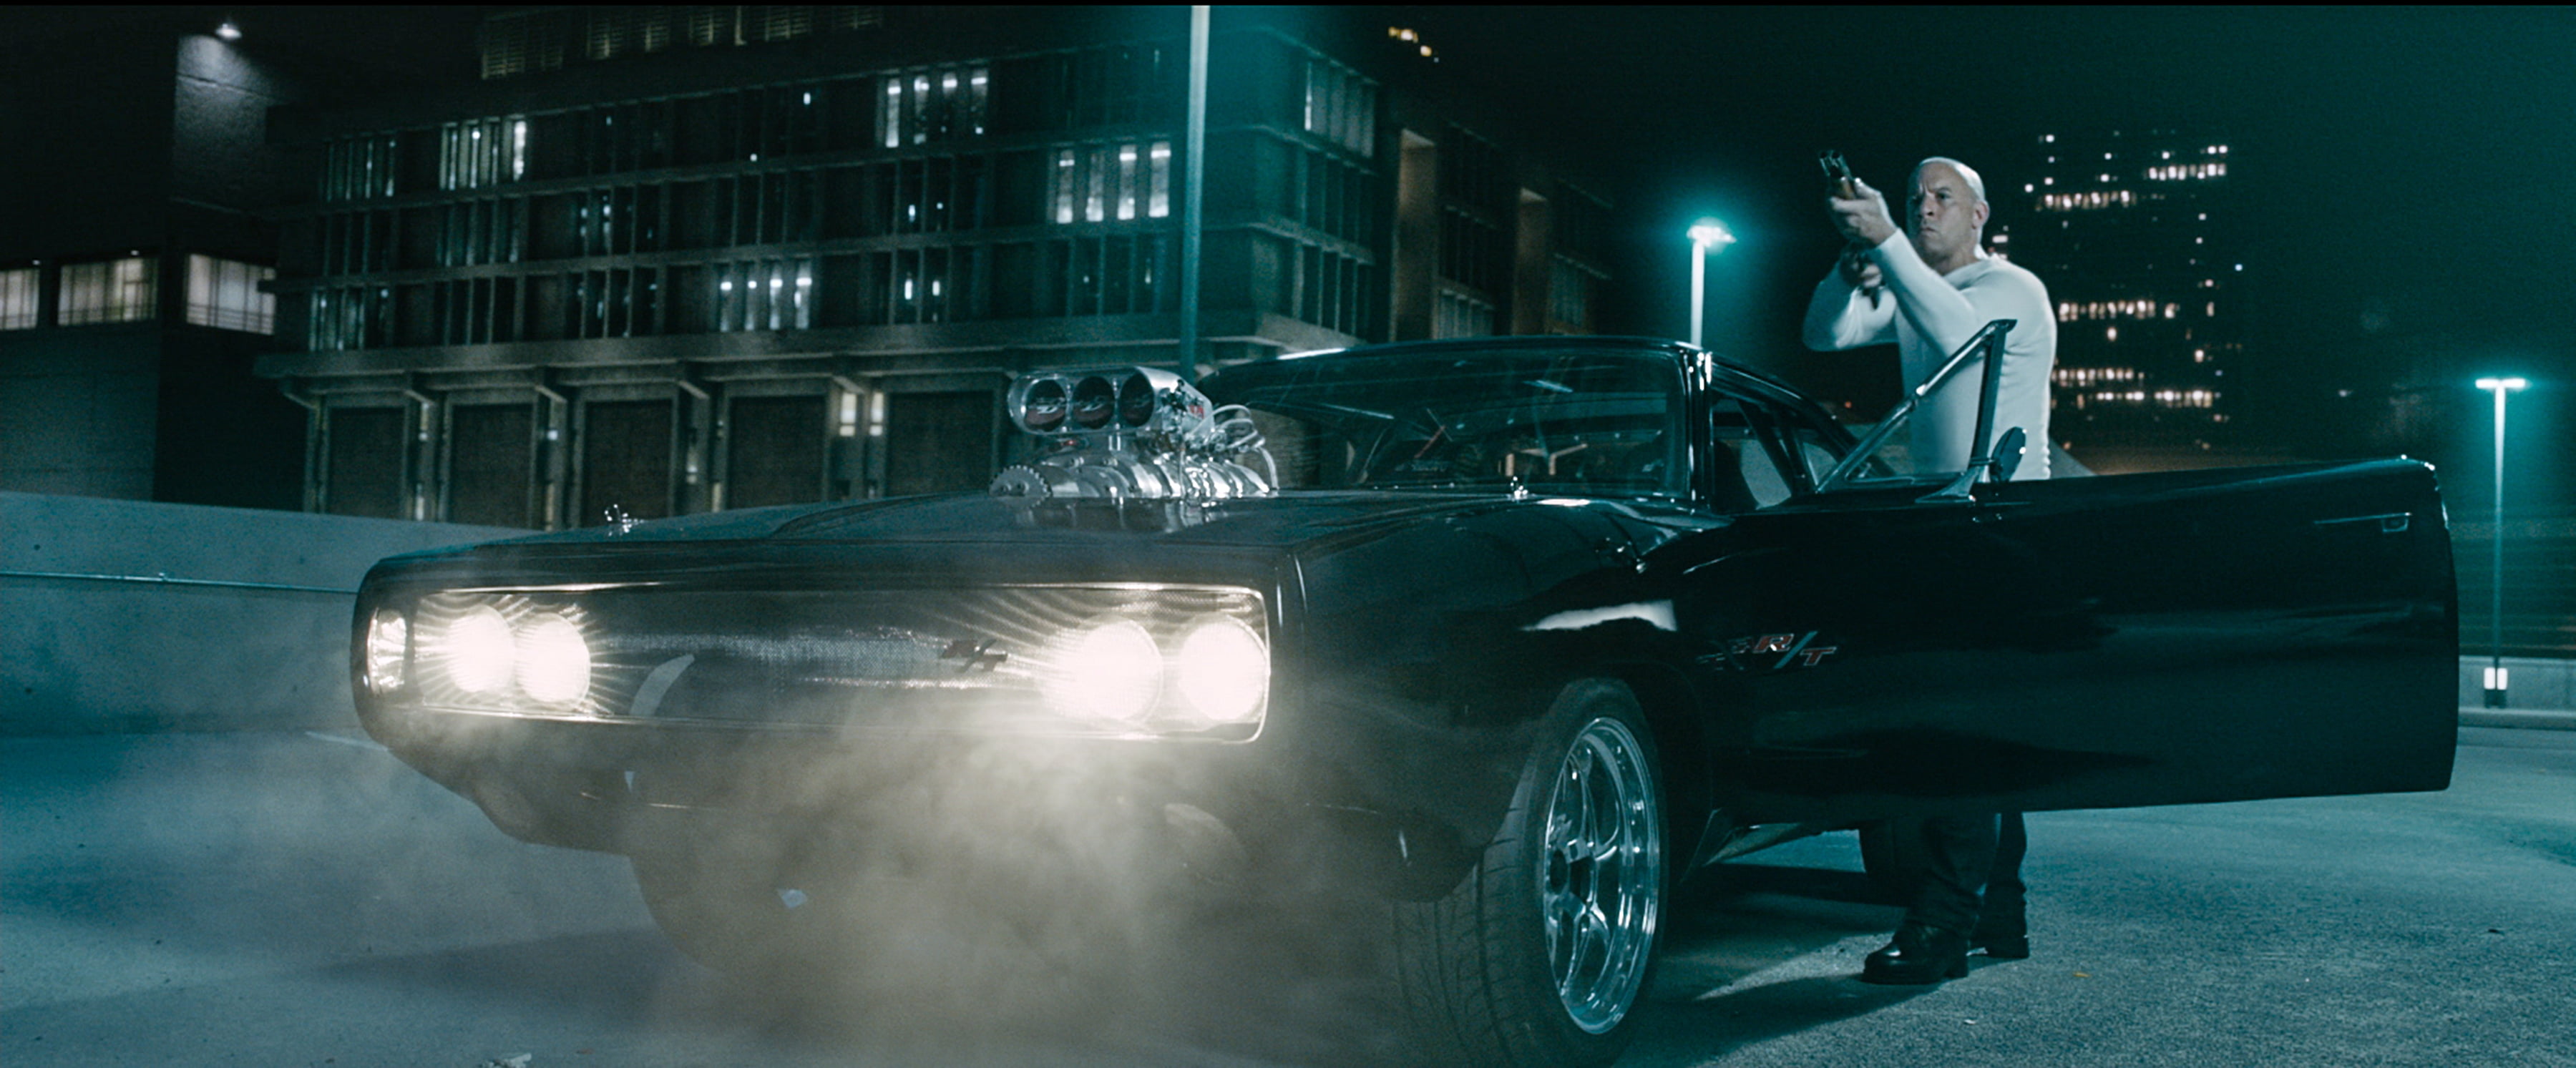 black vehicle, man, actor, VIN Diesel, Dominic Toretto, Fast and furious 7